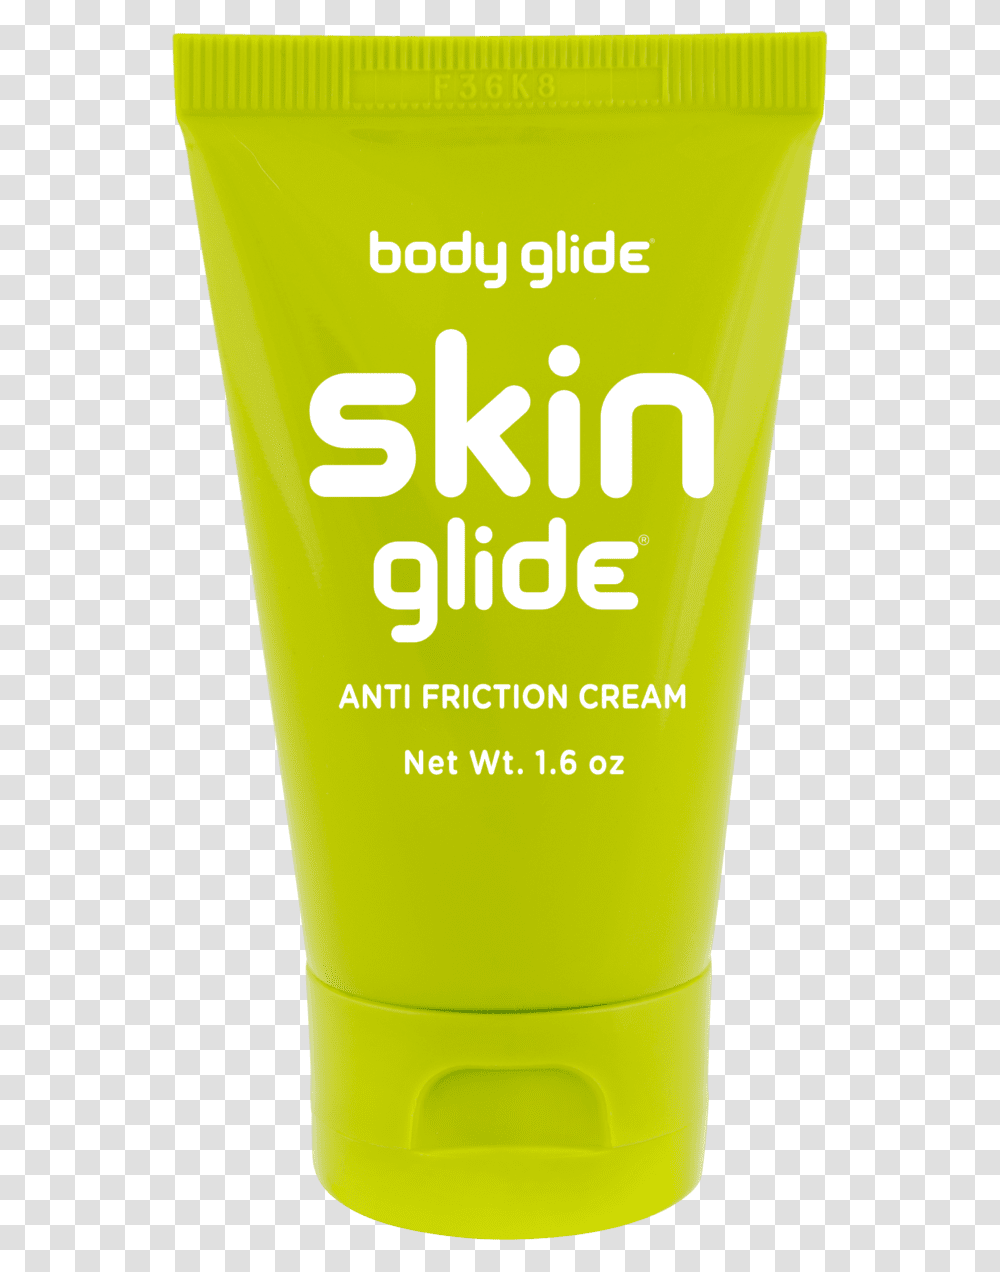 Body Glide Skin Glide Anti Friction Cream Sunscreen, Cosmetics, Bottle, Beer, Alcohol Transparent Png